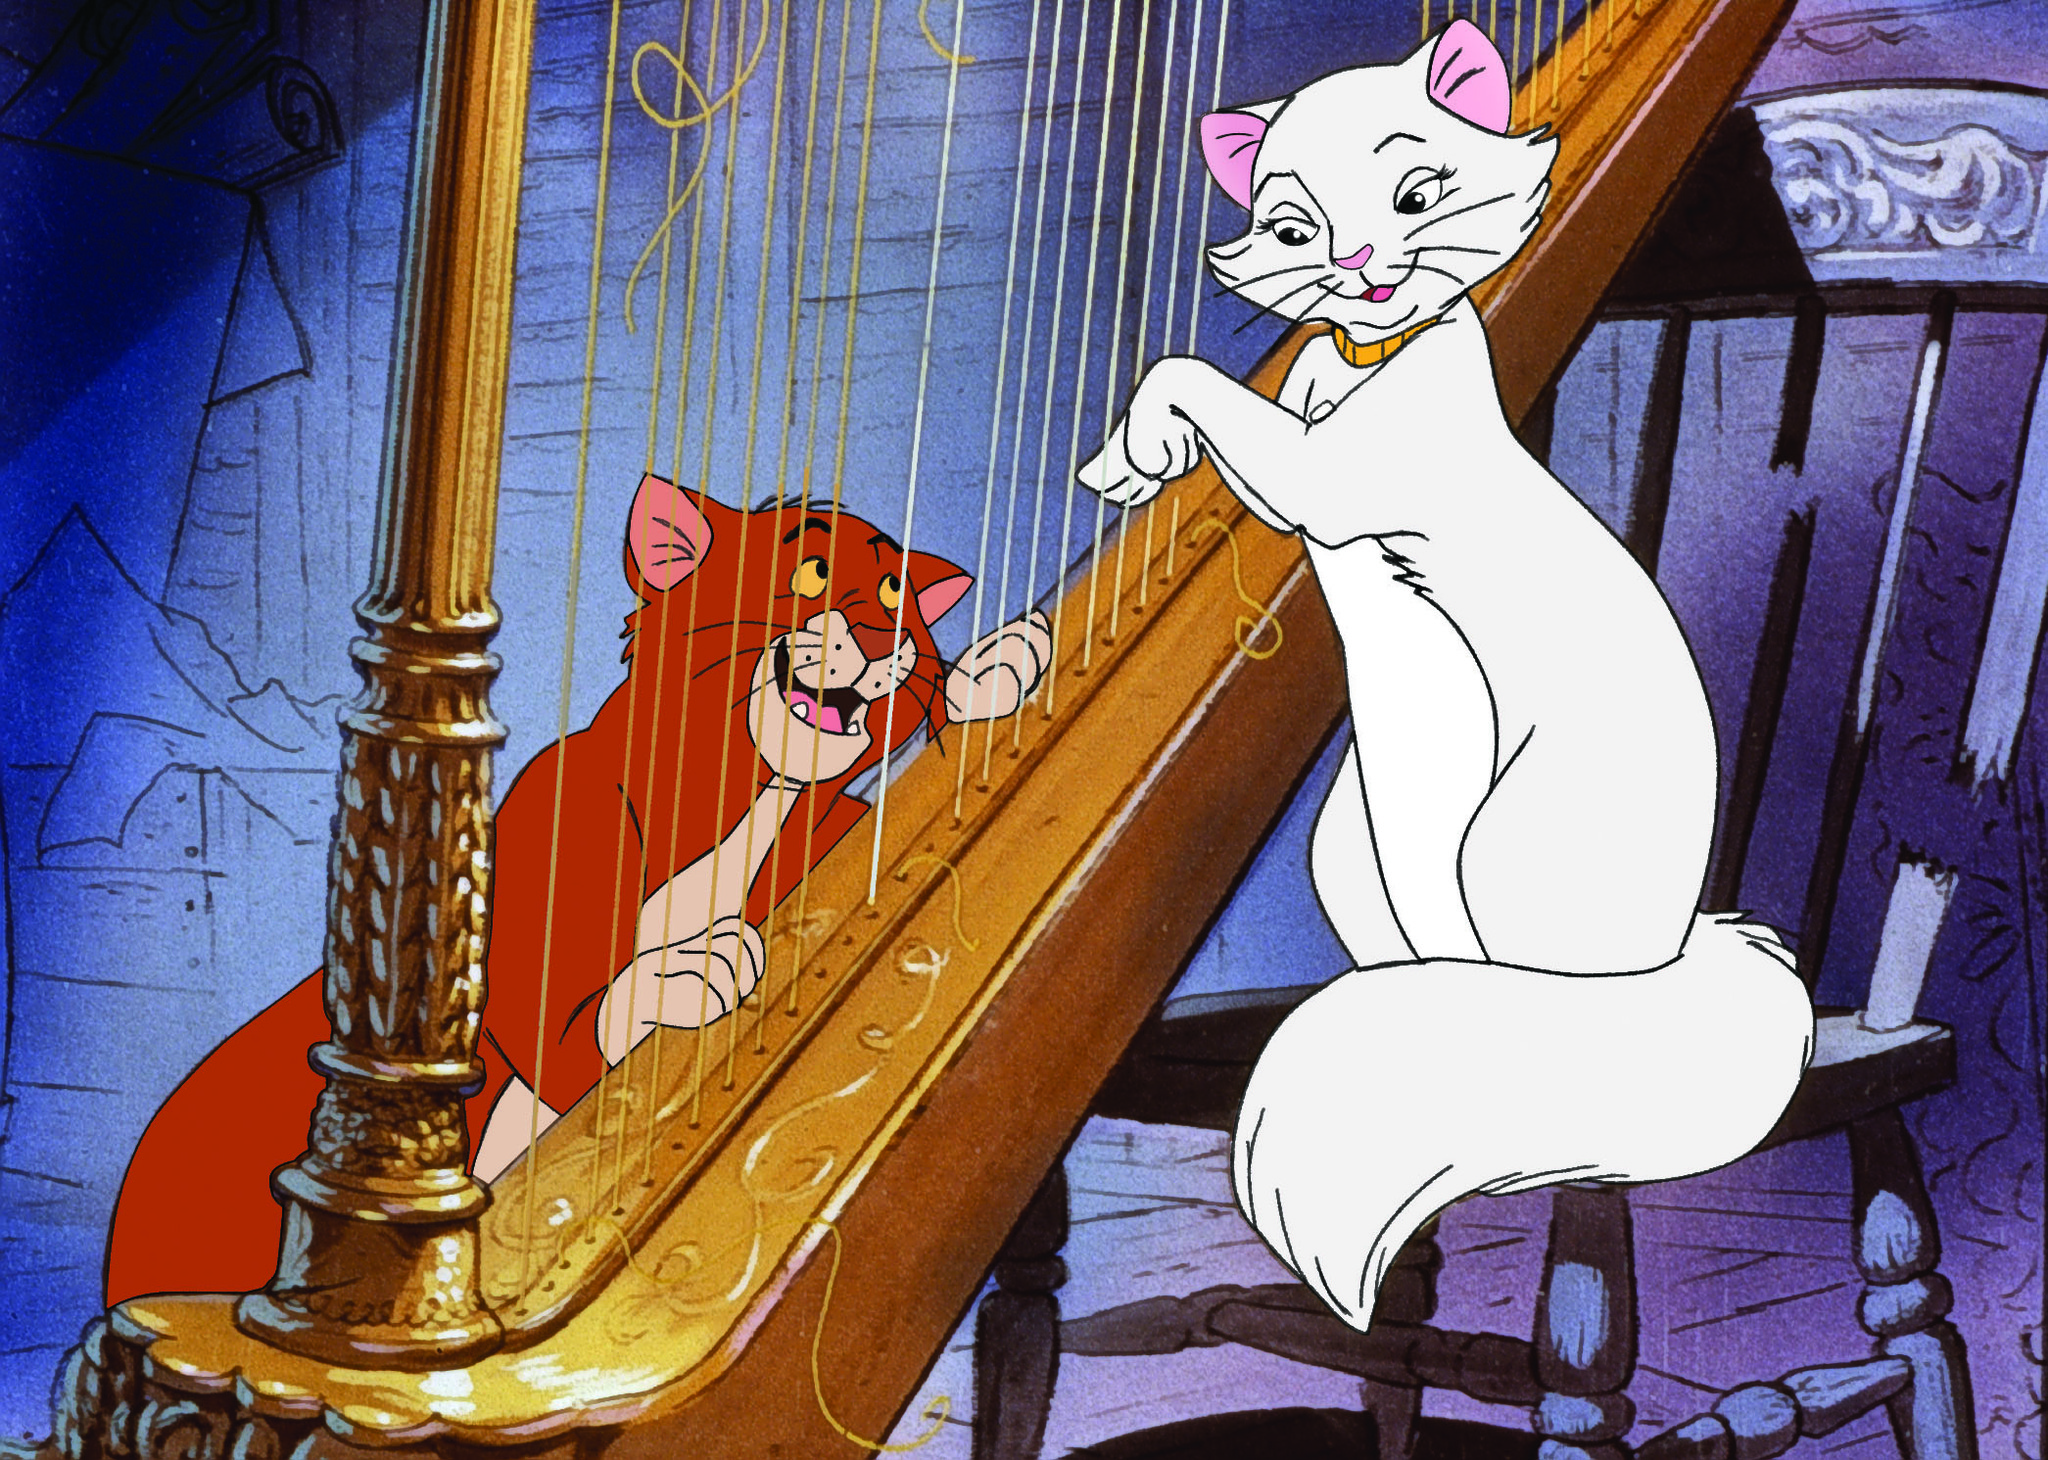 The classic movie The Aristocats